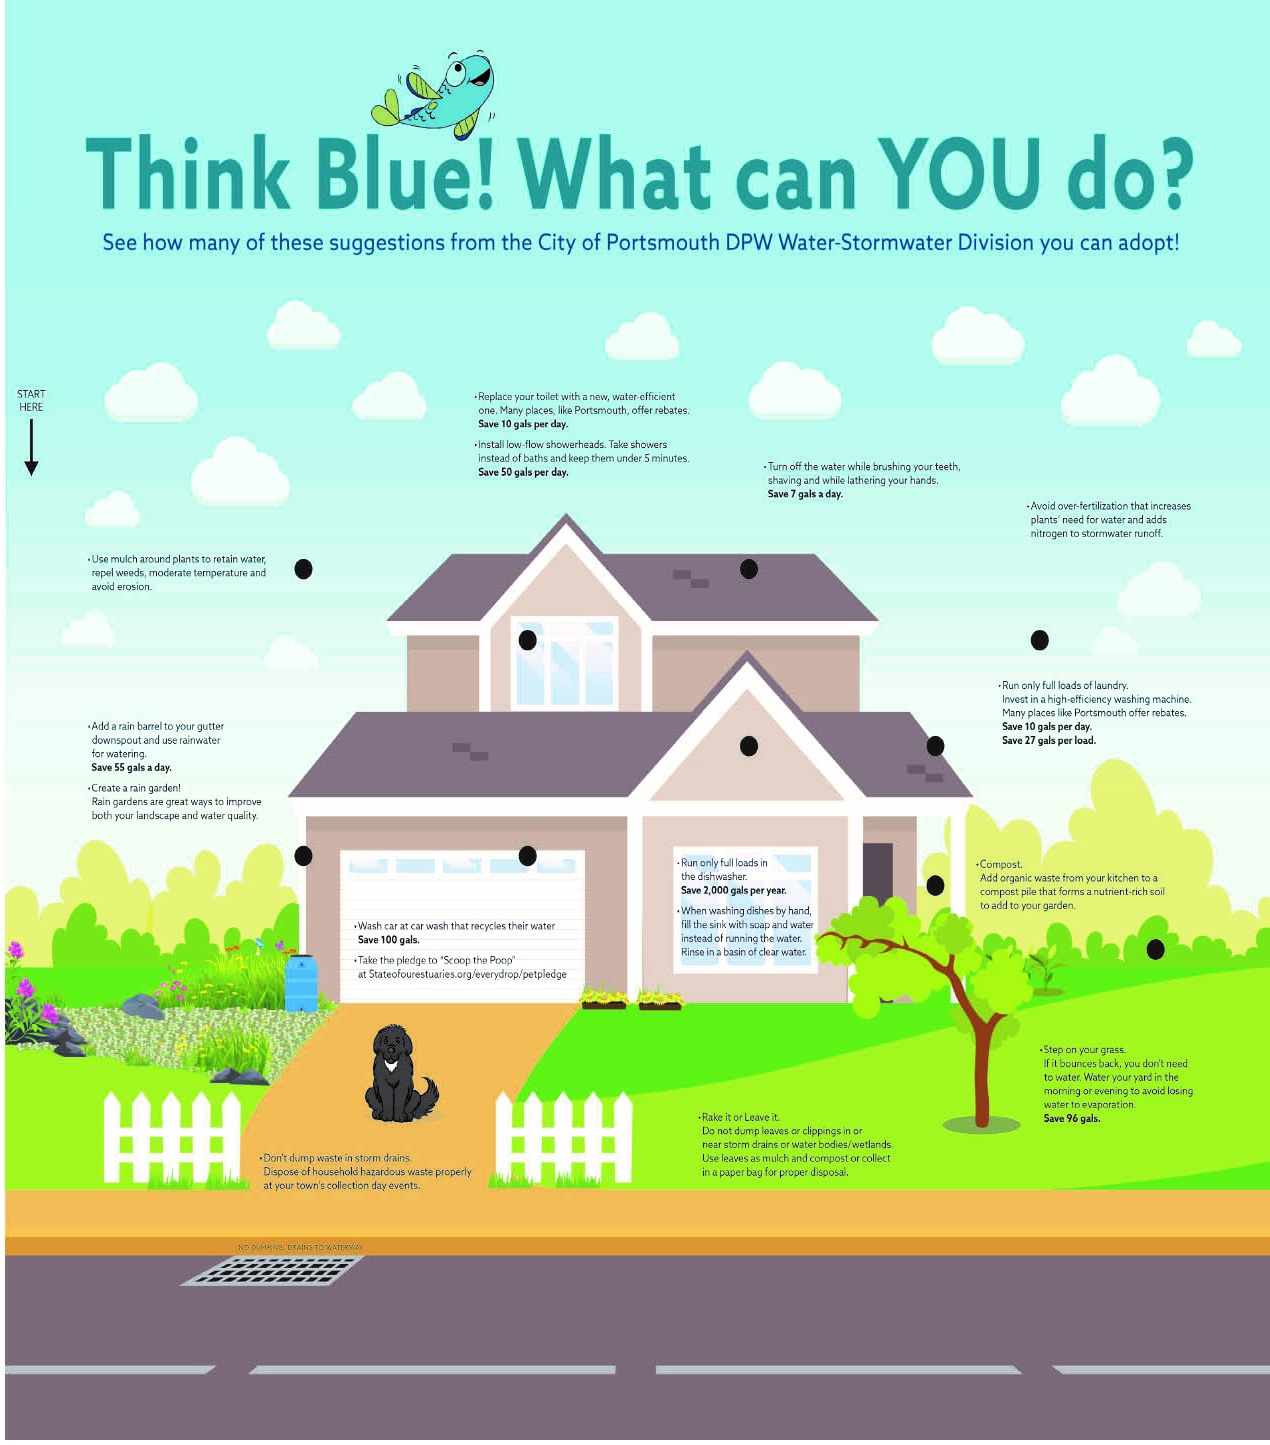 Think Blue suggestions for protecting water quality at home.